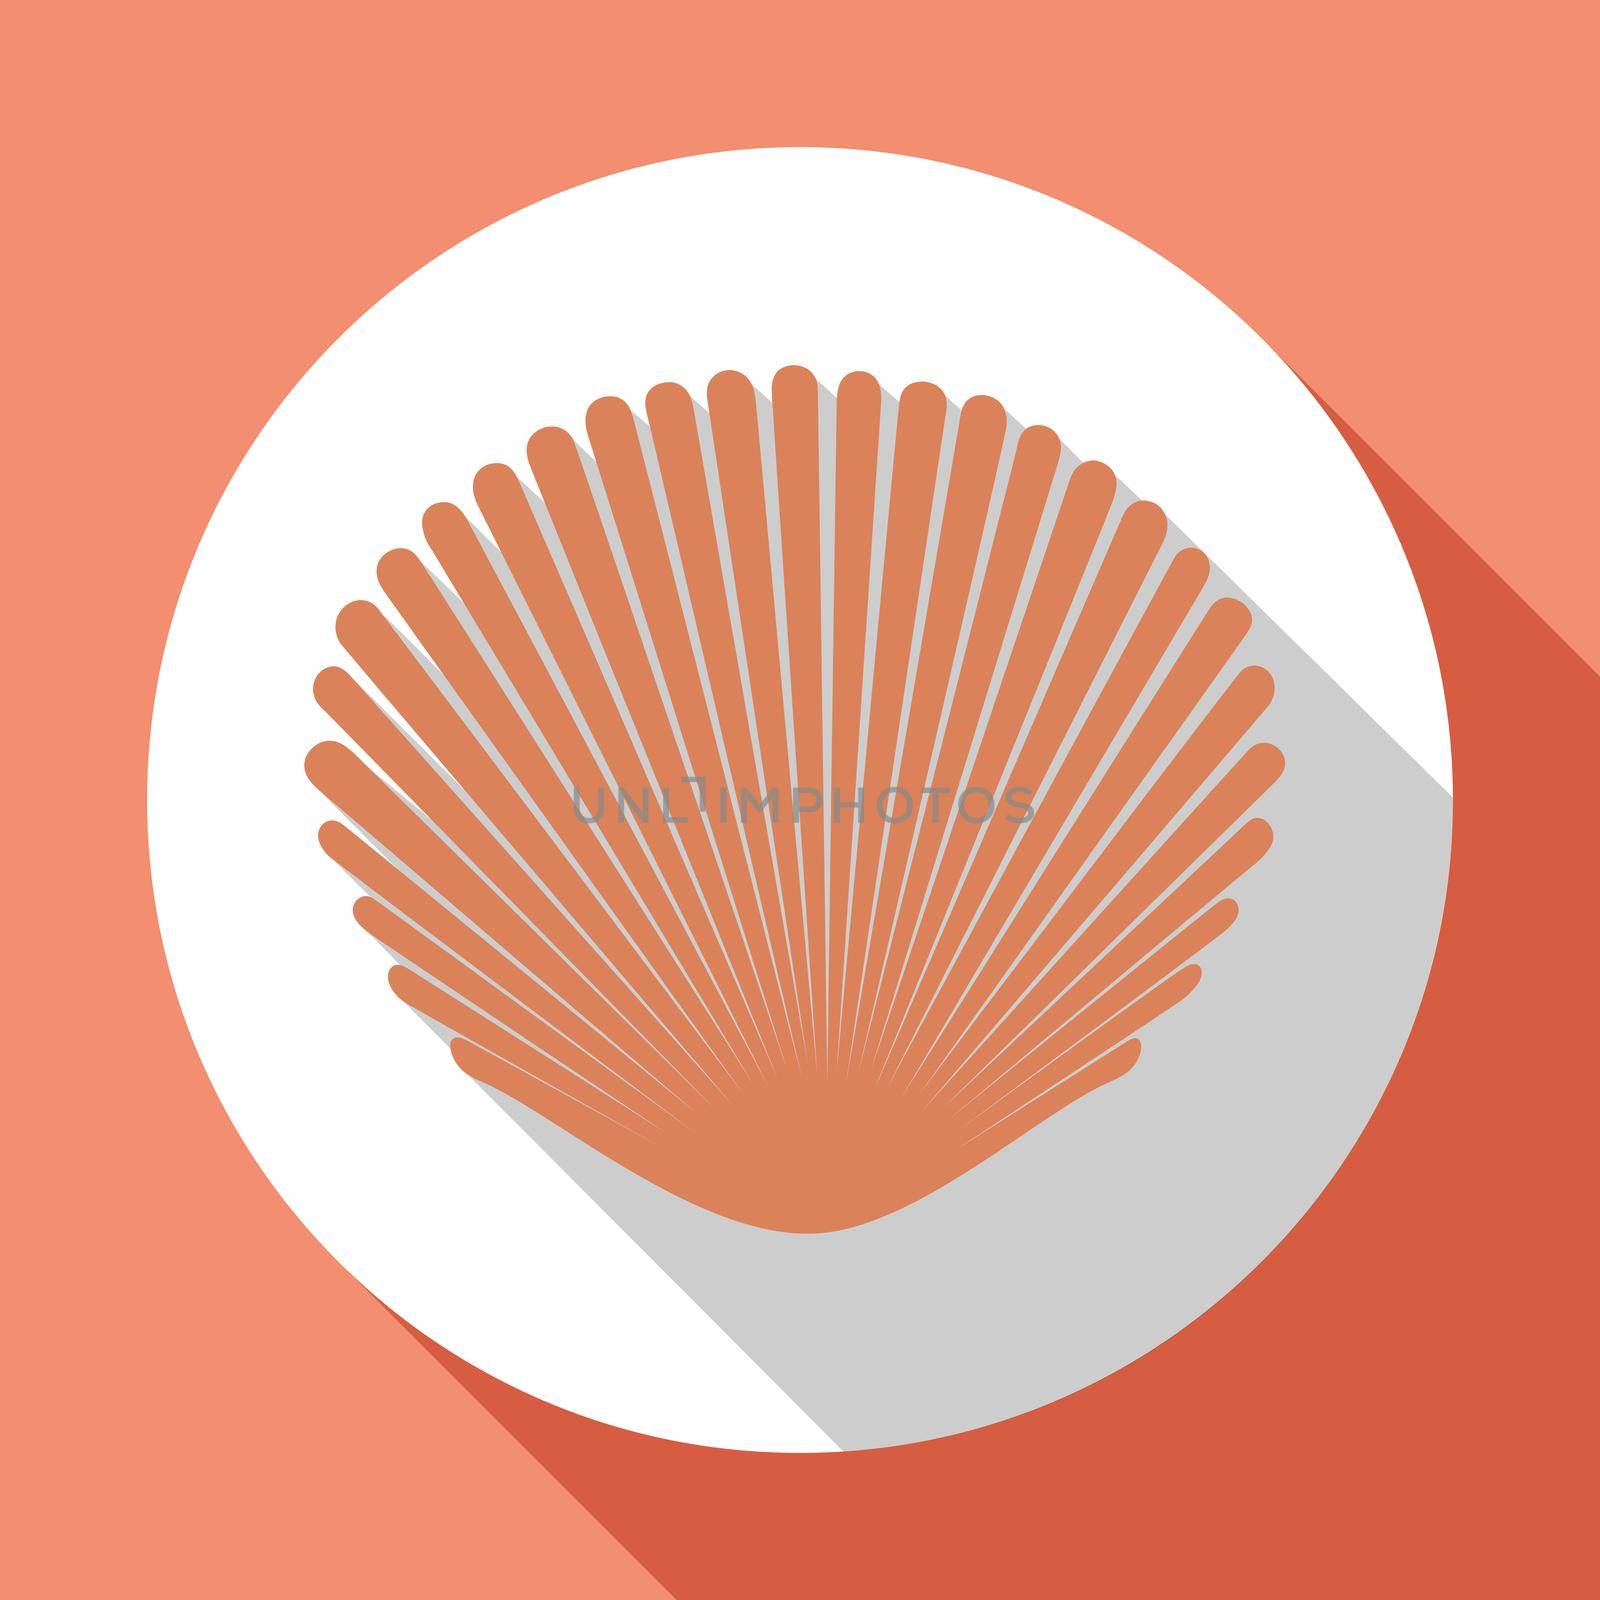 Seashell flat icon with long shadow. Flat design style. Raster version by Marin4ik